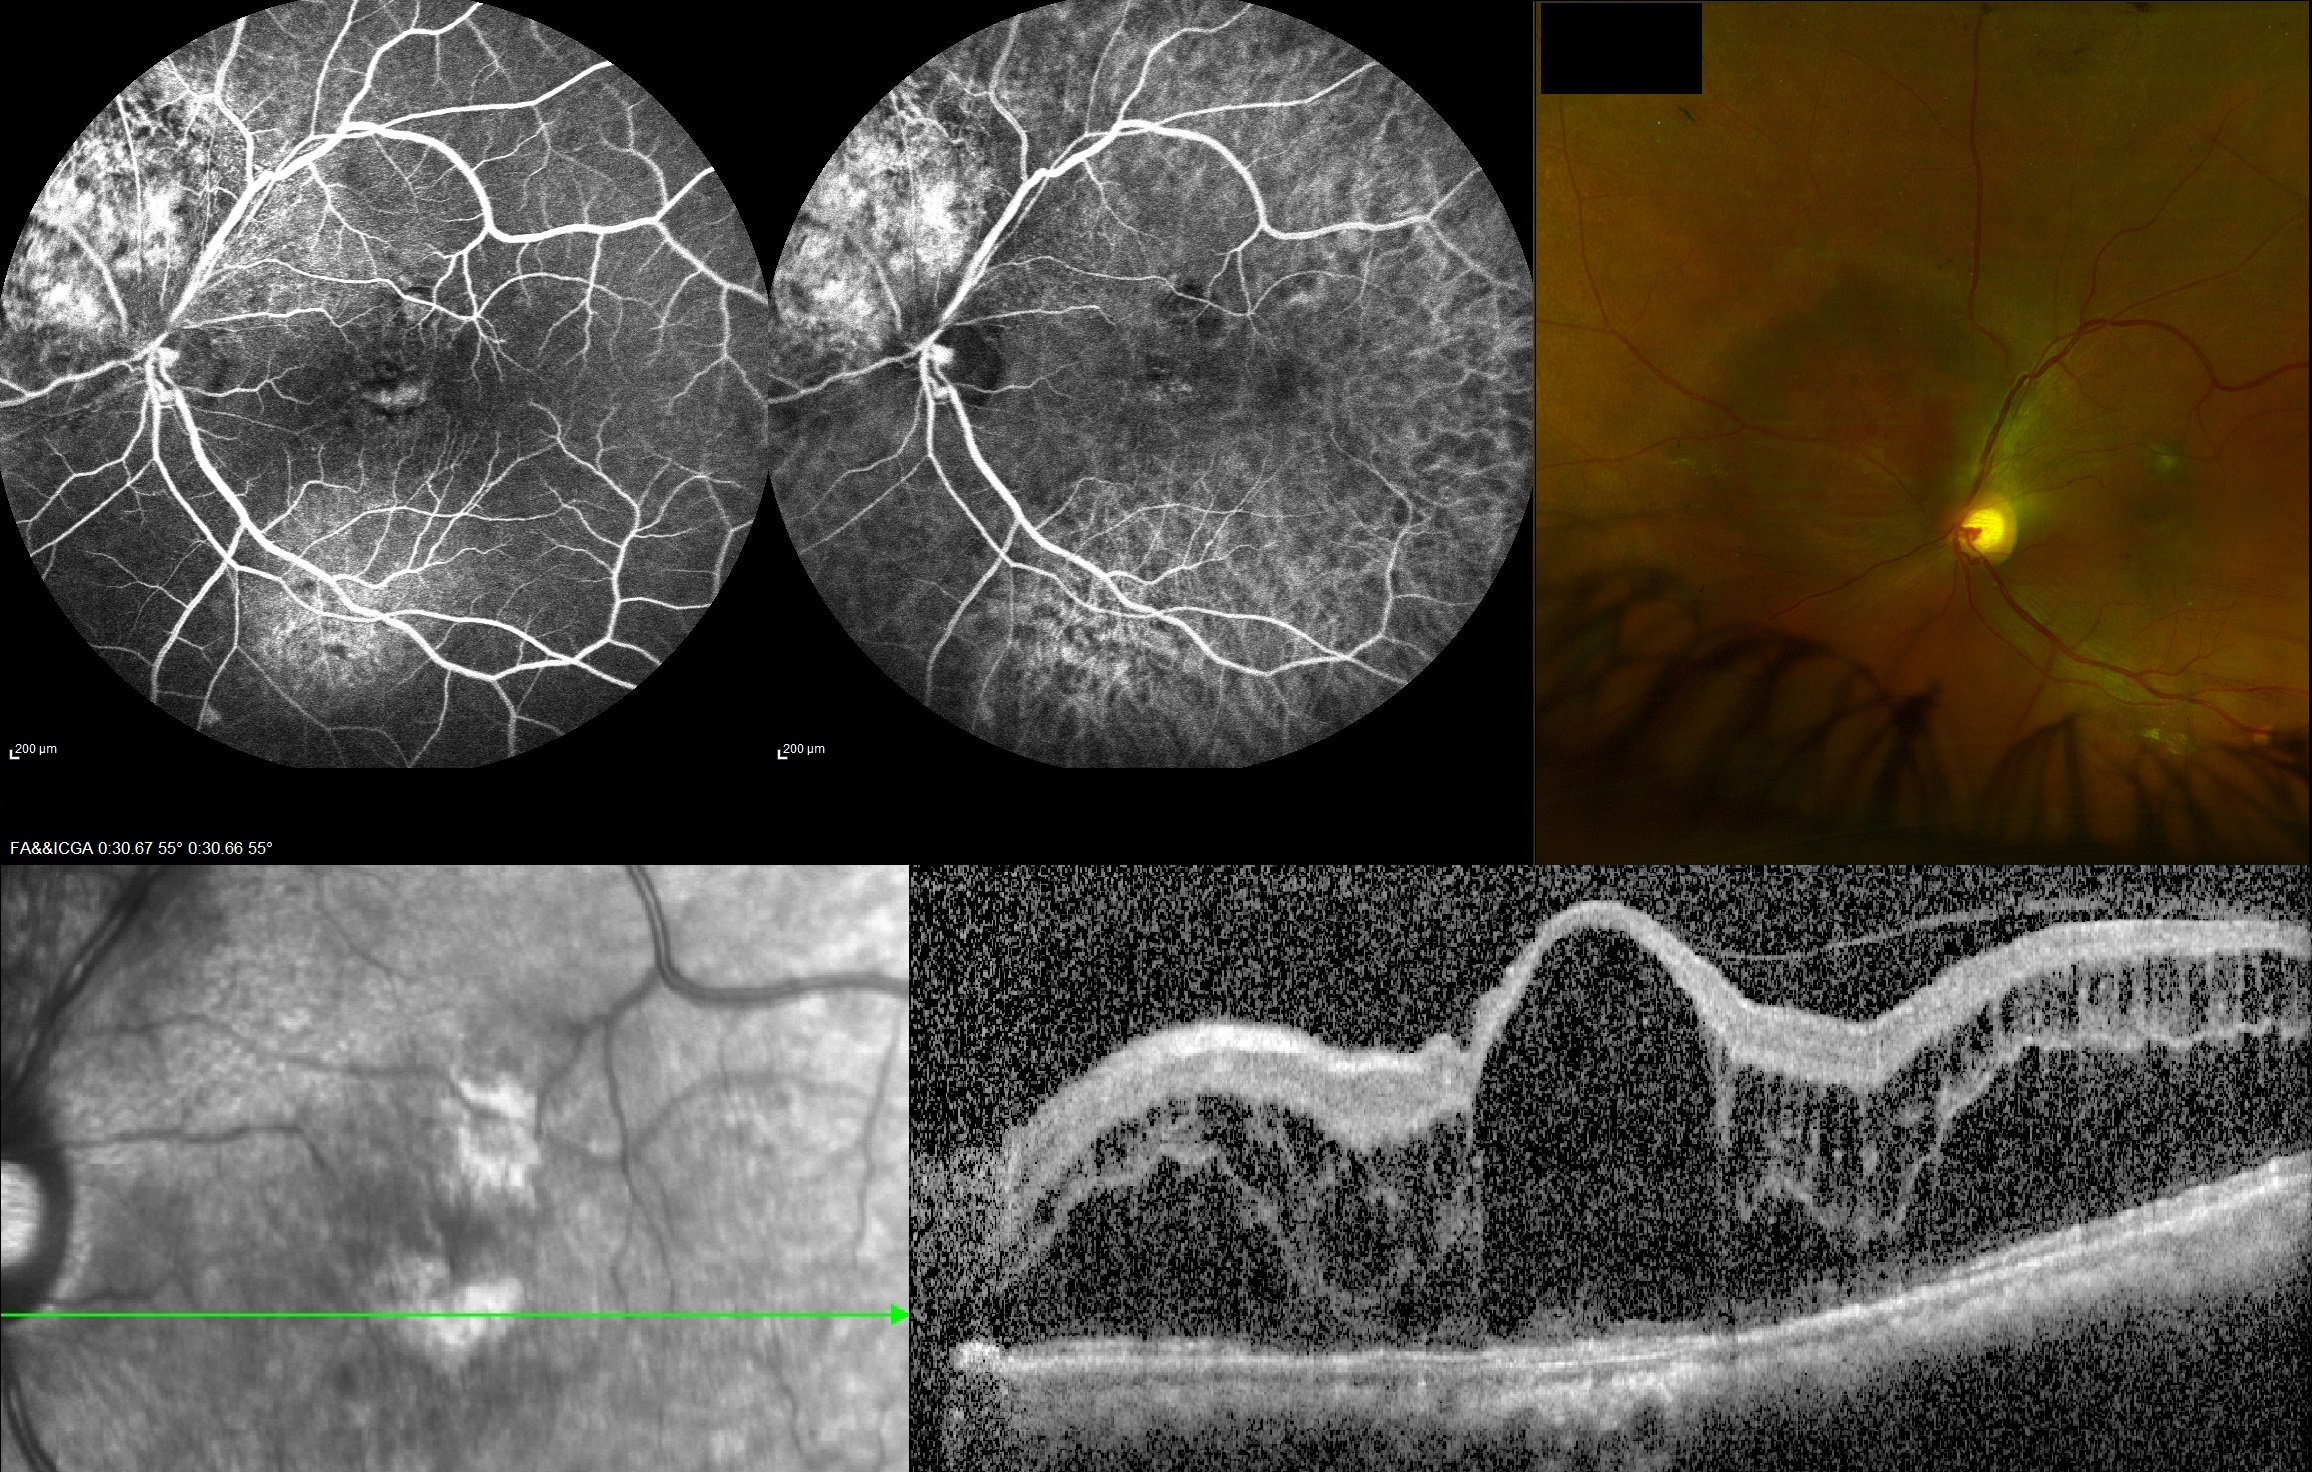 FA (A), ICGA (B), color fundus photo (C) and optical coherence tomography image (D) of the left eye of a patient with circums